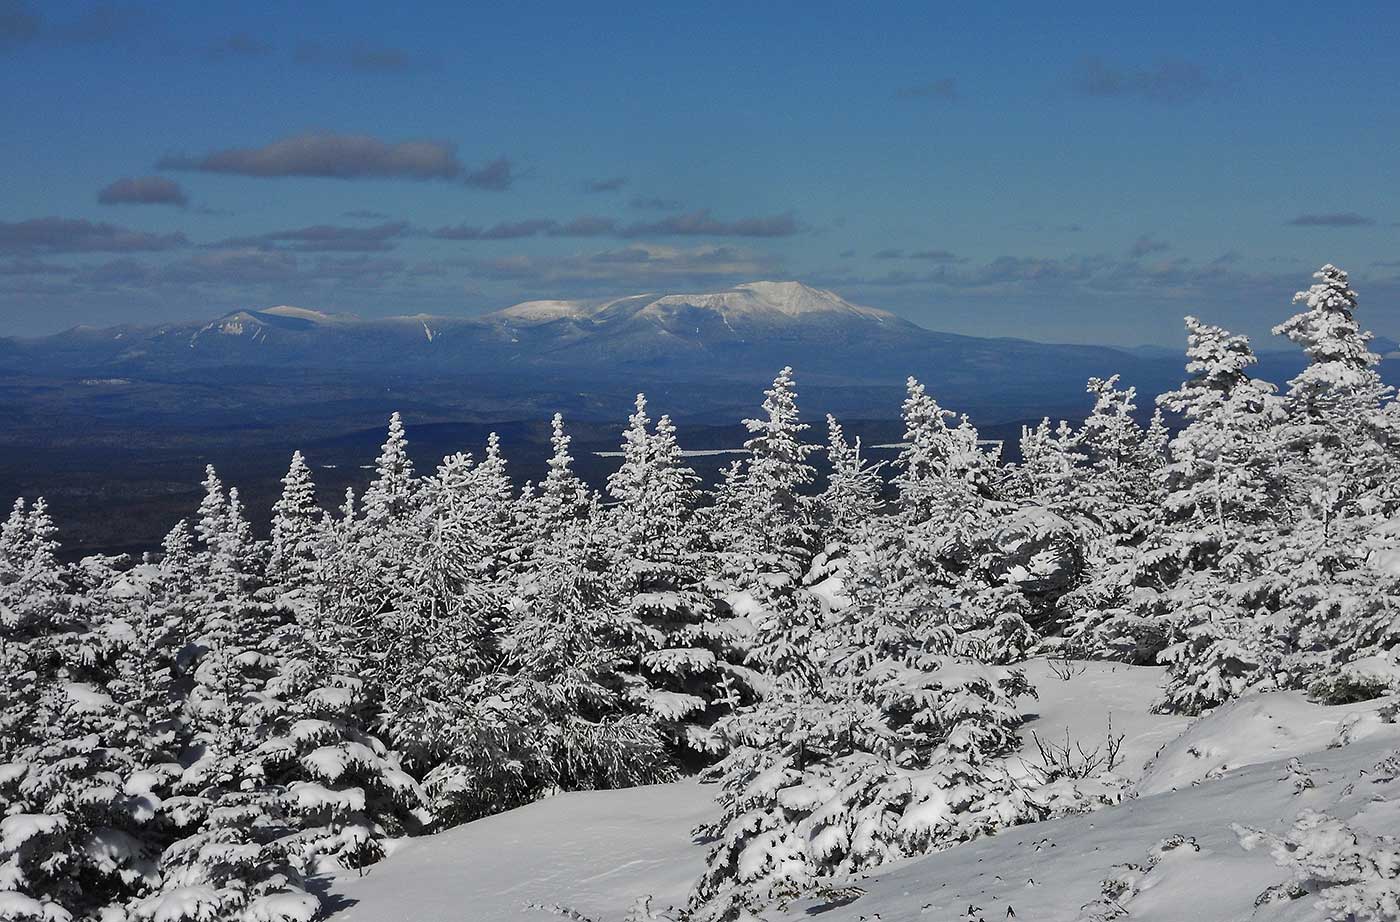 View of Katahdin from White Cap Mountain over snowy trees. Photo by Wendy Weiger